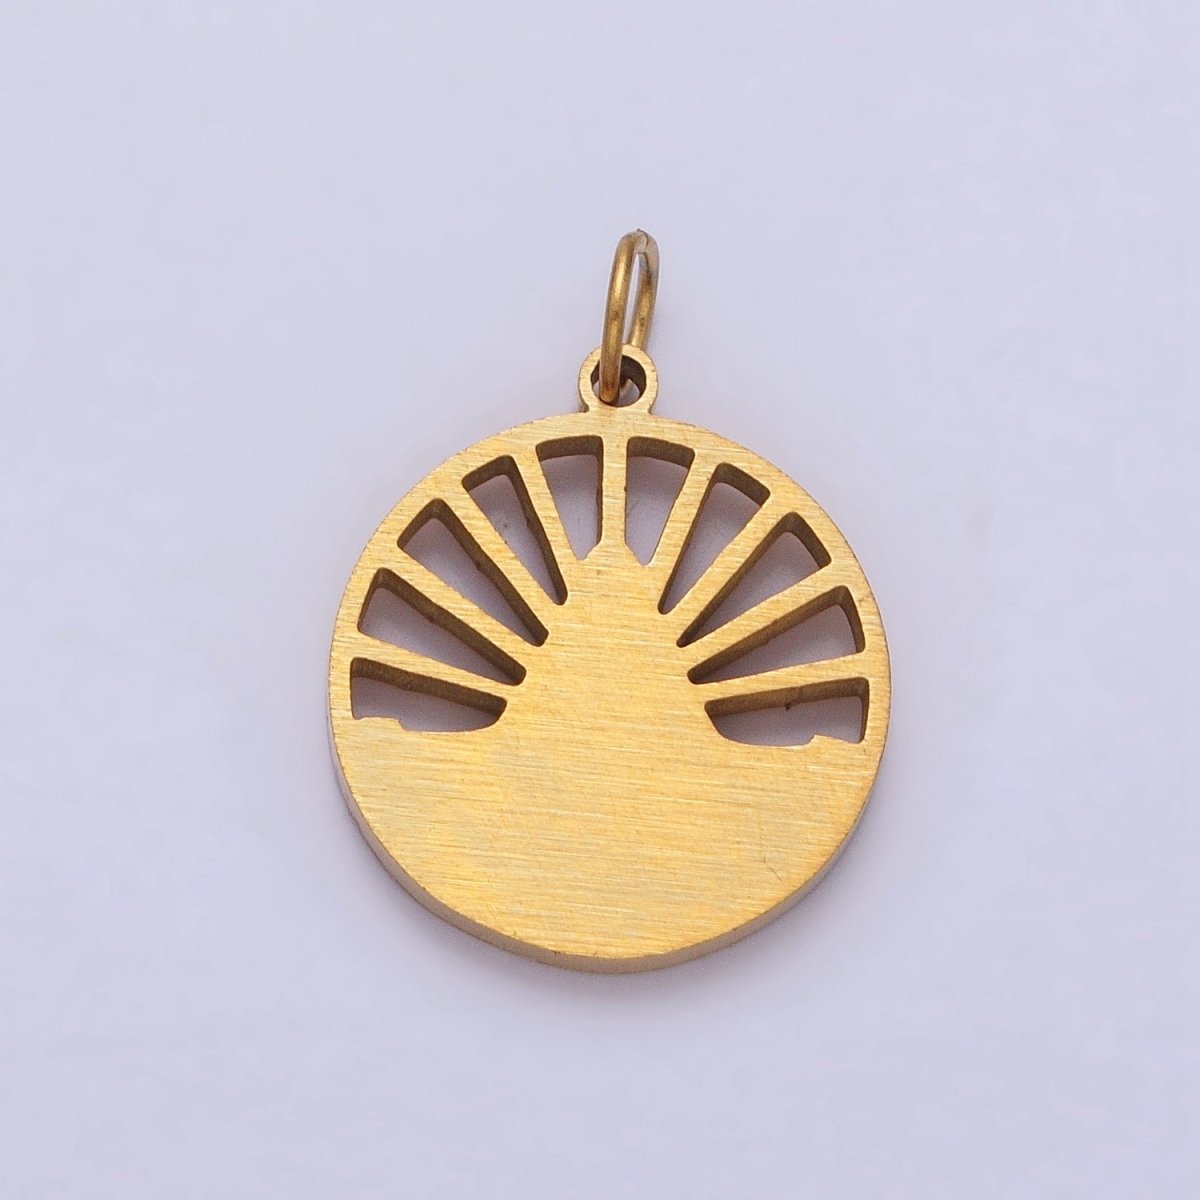 Stainless Steel Praying Hands Numerology 11:11 Sun Beam Round Charm in Silver & Gold | P-920 - DLUXCA